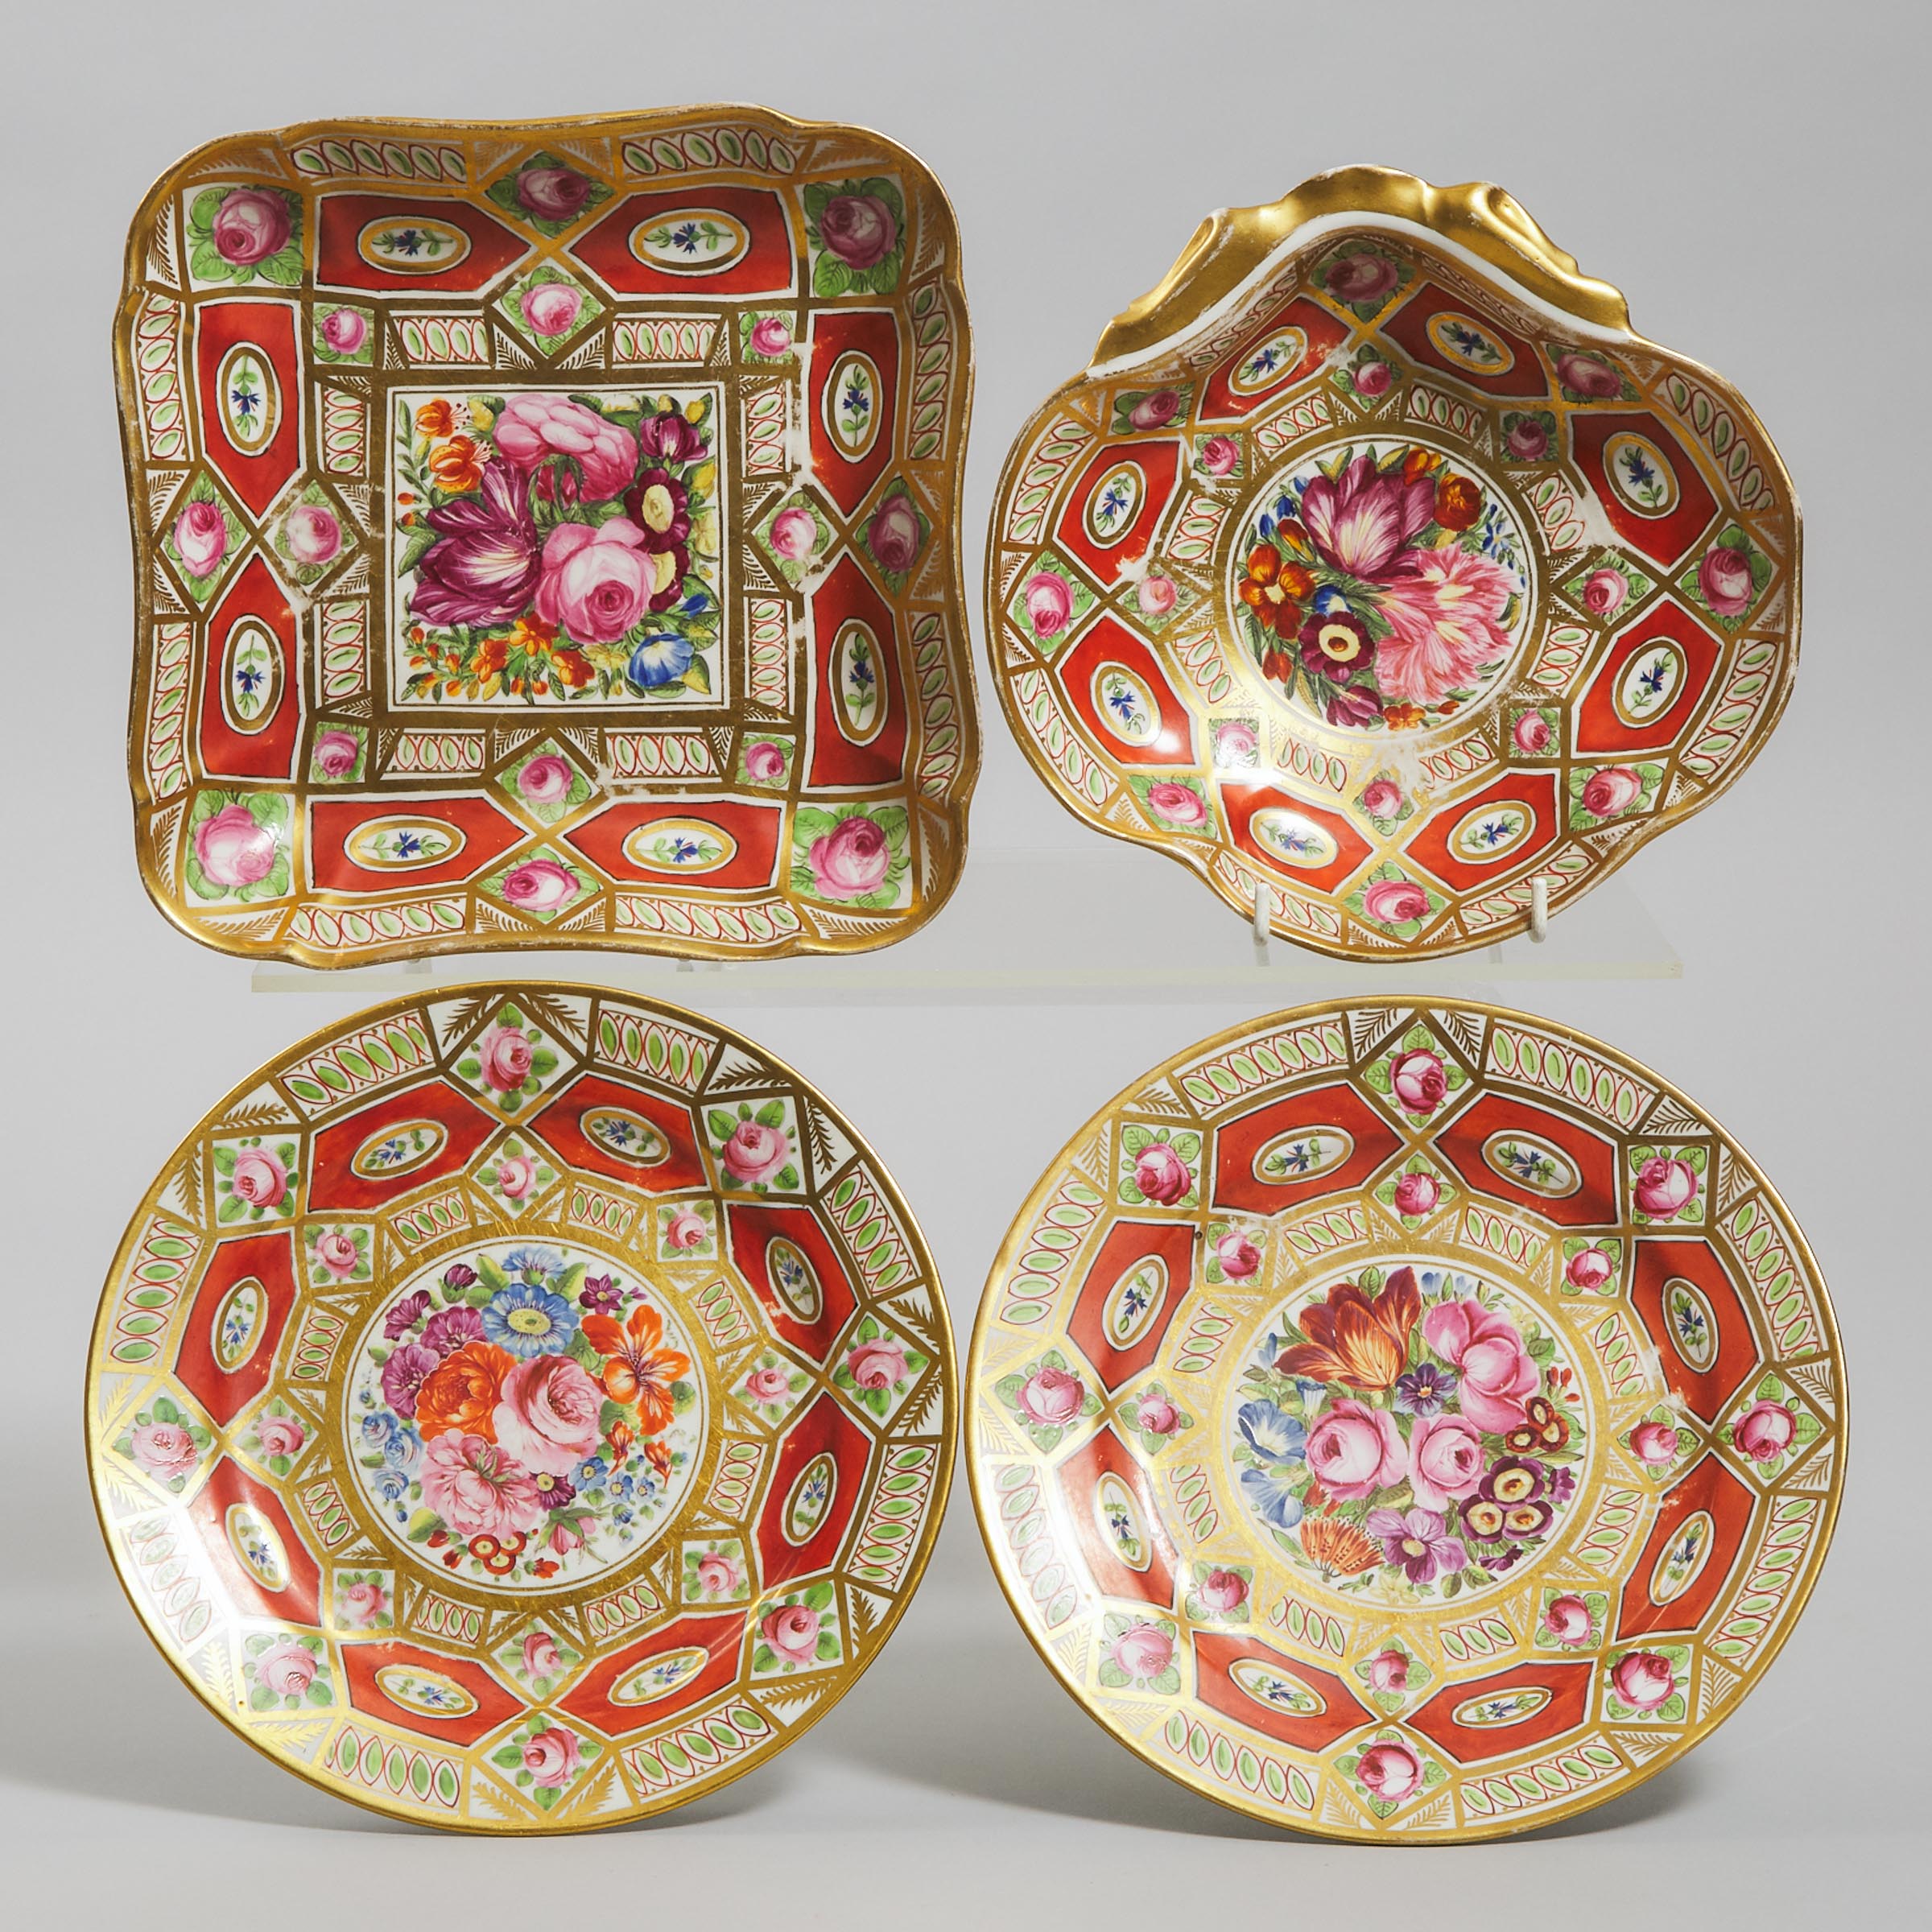 Coalport 'Church Gresley' Pattern Square Dish, Shell Dish and a Pair of Plates, c.1810